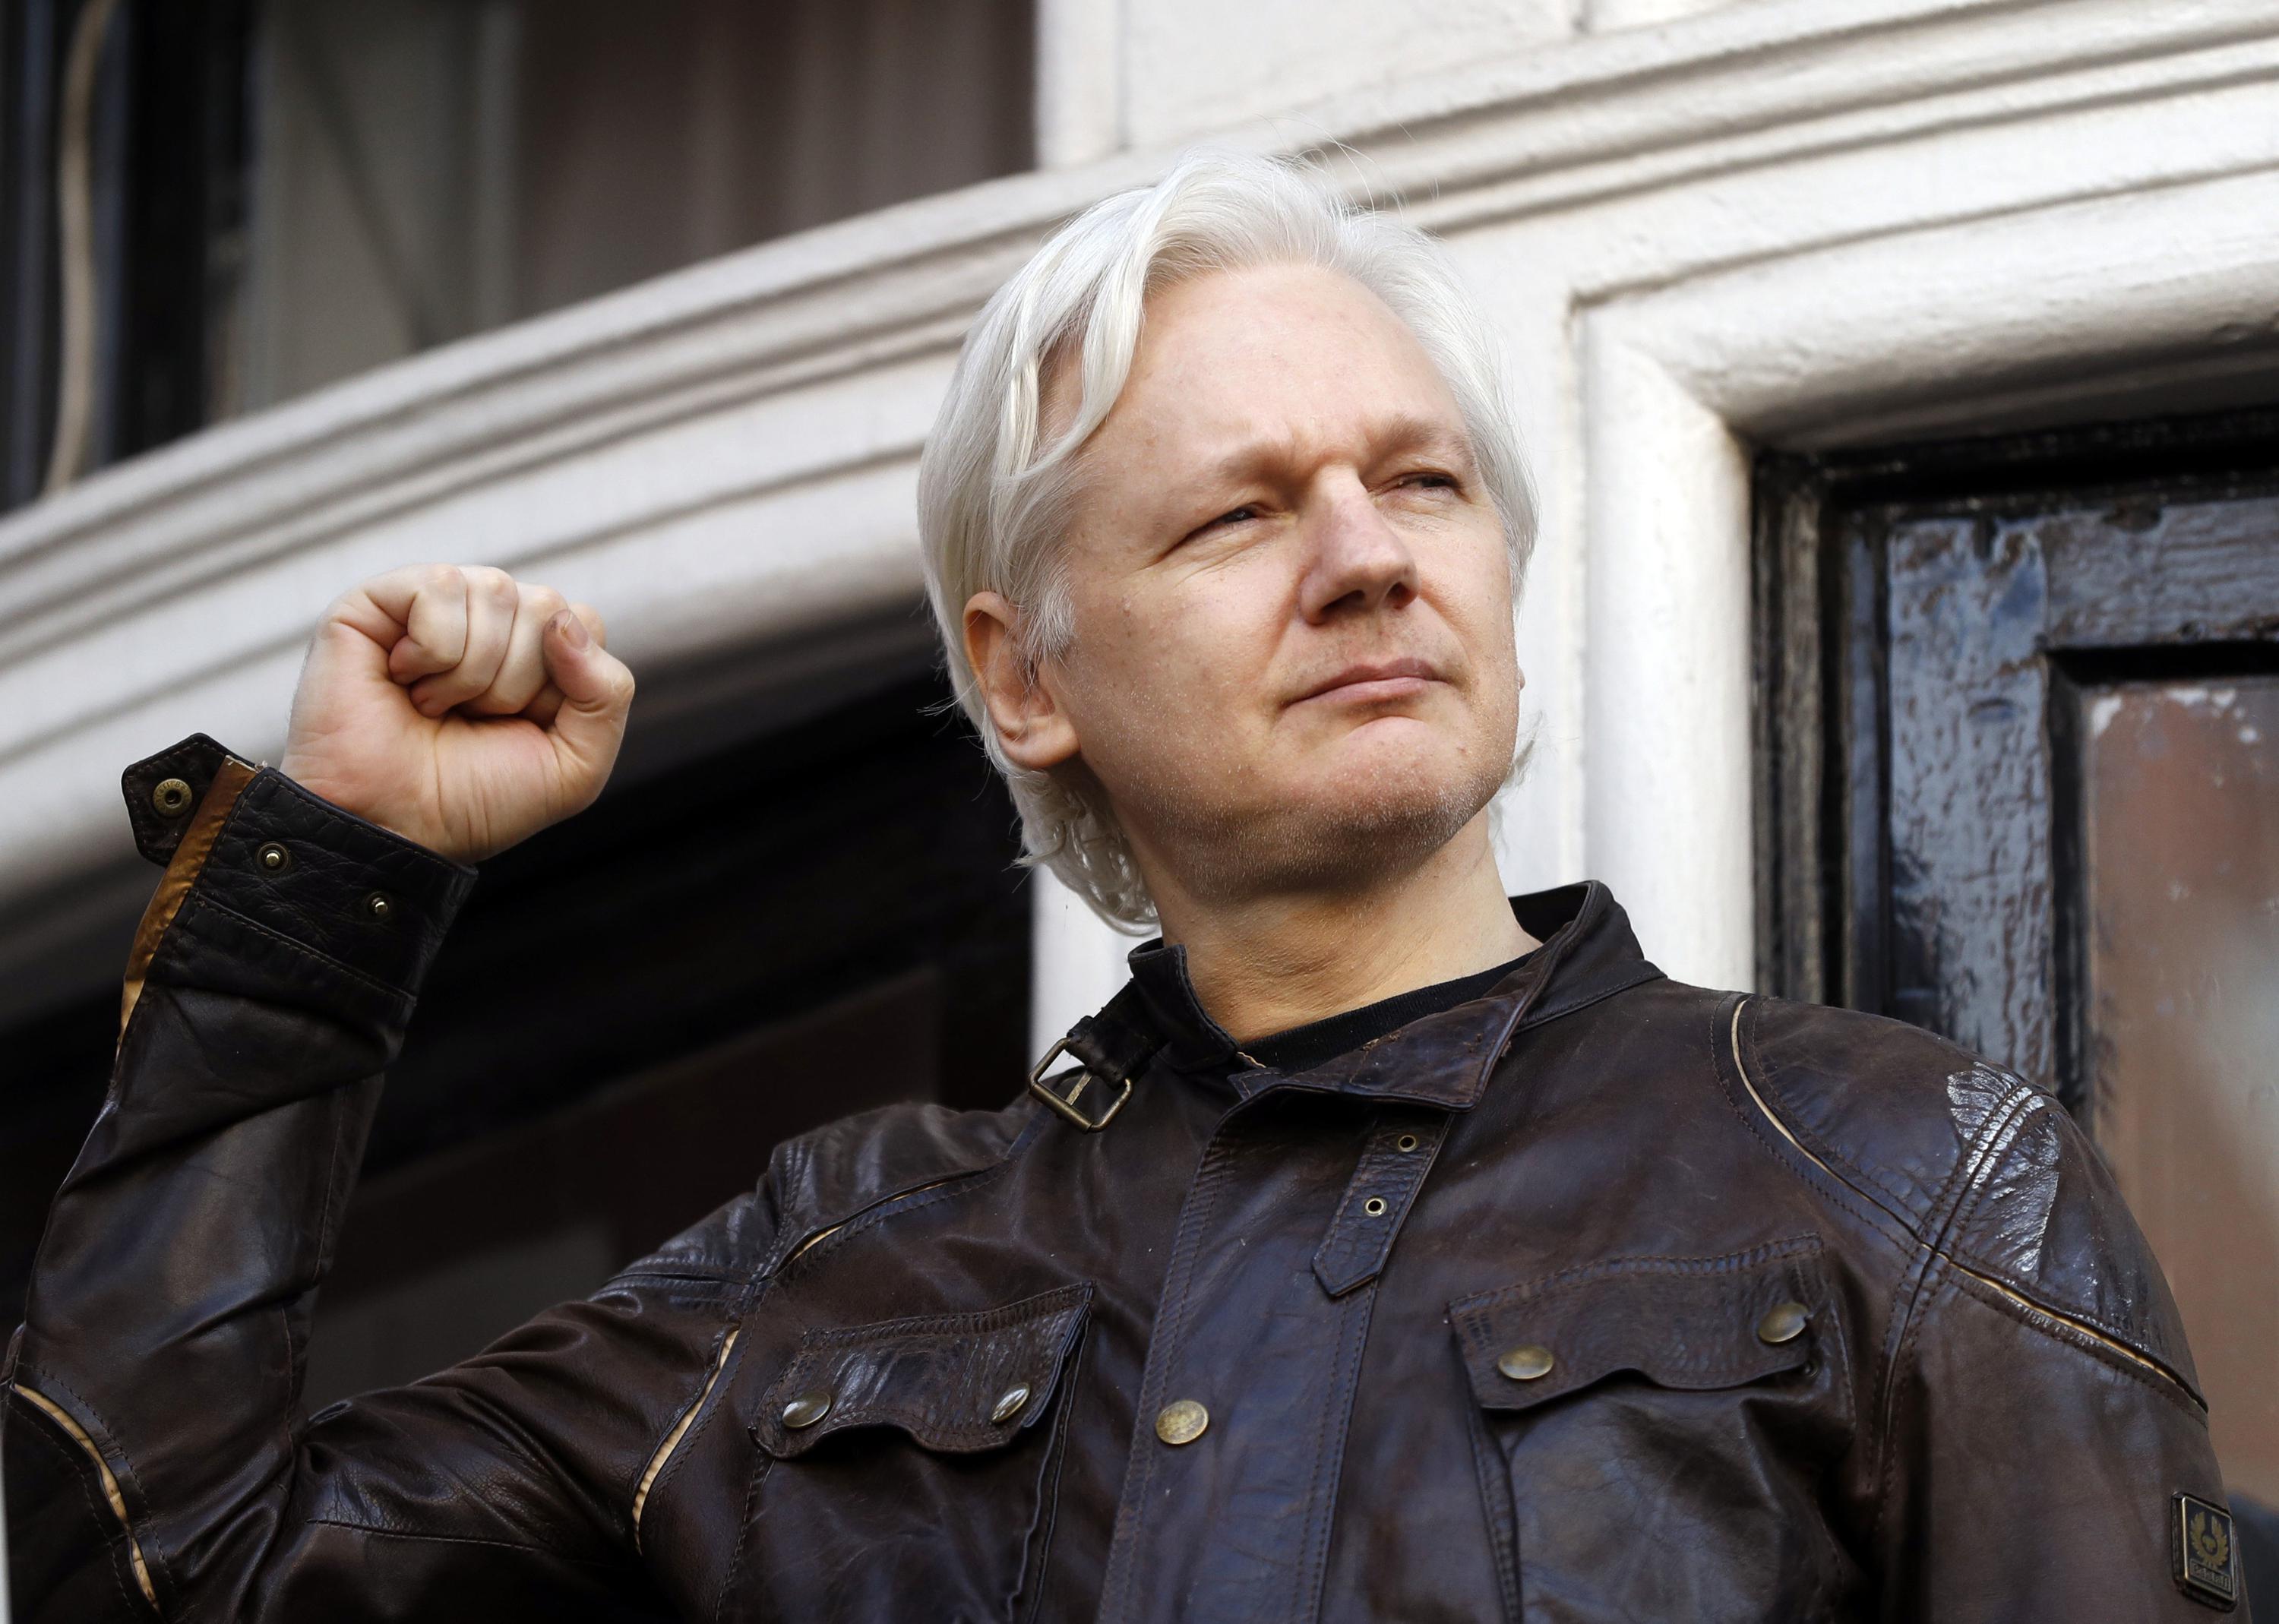 FILE - Julian Assange greets supporters outside the Ecuadorian embassy in London, on May 19, 2017. Australia’s Prime Minister Anthony Albanese said Wednesday, Nov. 30, 2022, he recently told U.S. President Joe Biden’s administration to bring WikiLeaks founder and Australian citizen Julian Assange’s prosecution to a close.(AP Photo/Frank Augstein, File)